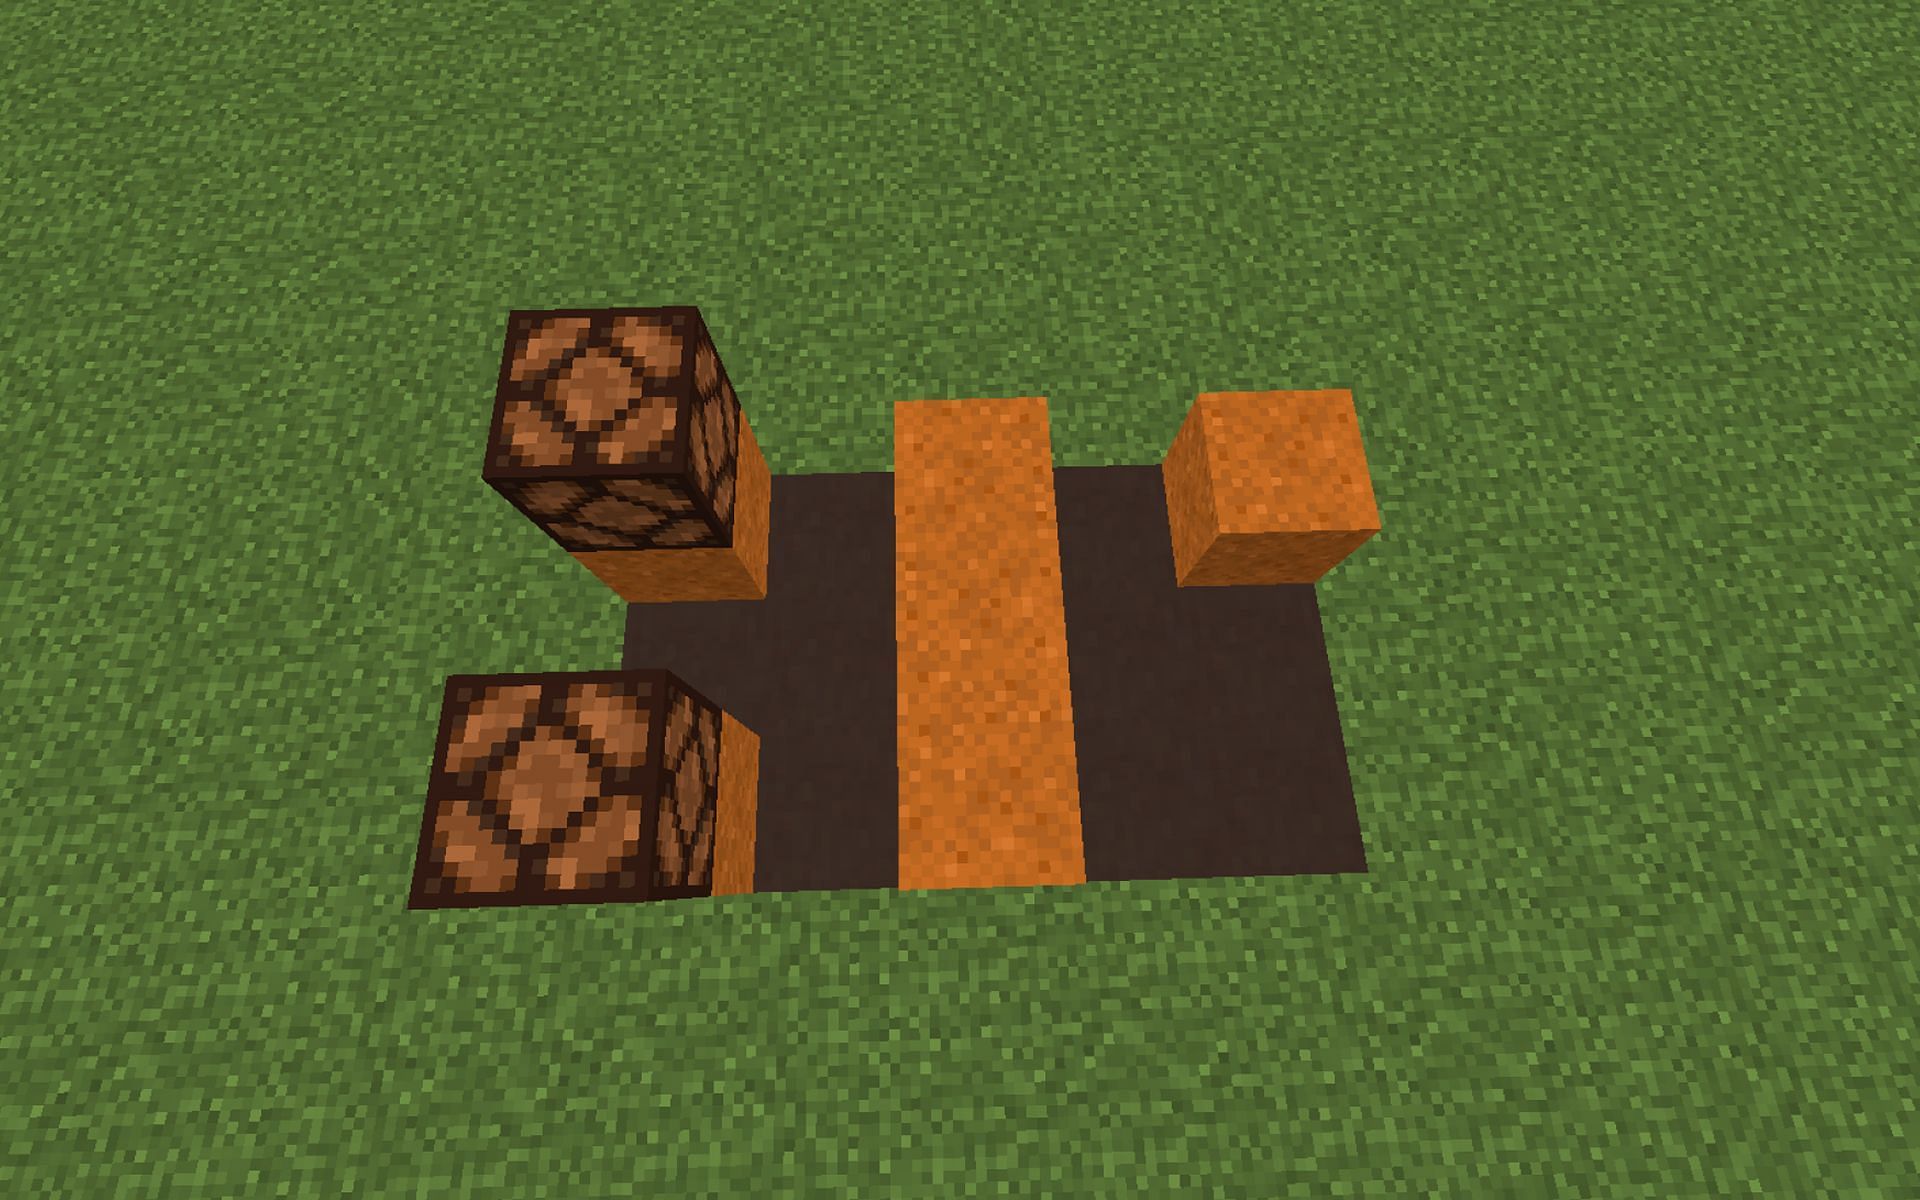 Redstone lamps will display this randomizer circuit&#039;s output. (Image via Minecraft.)